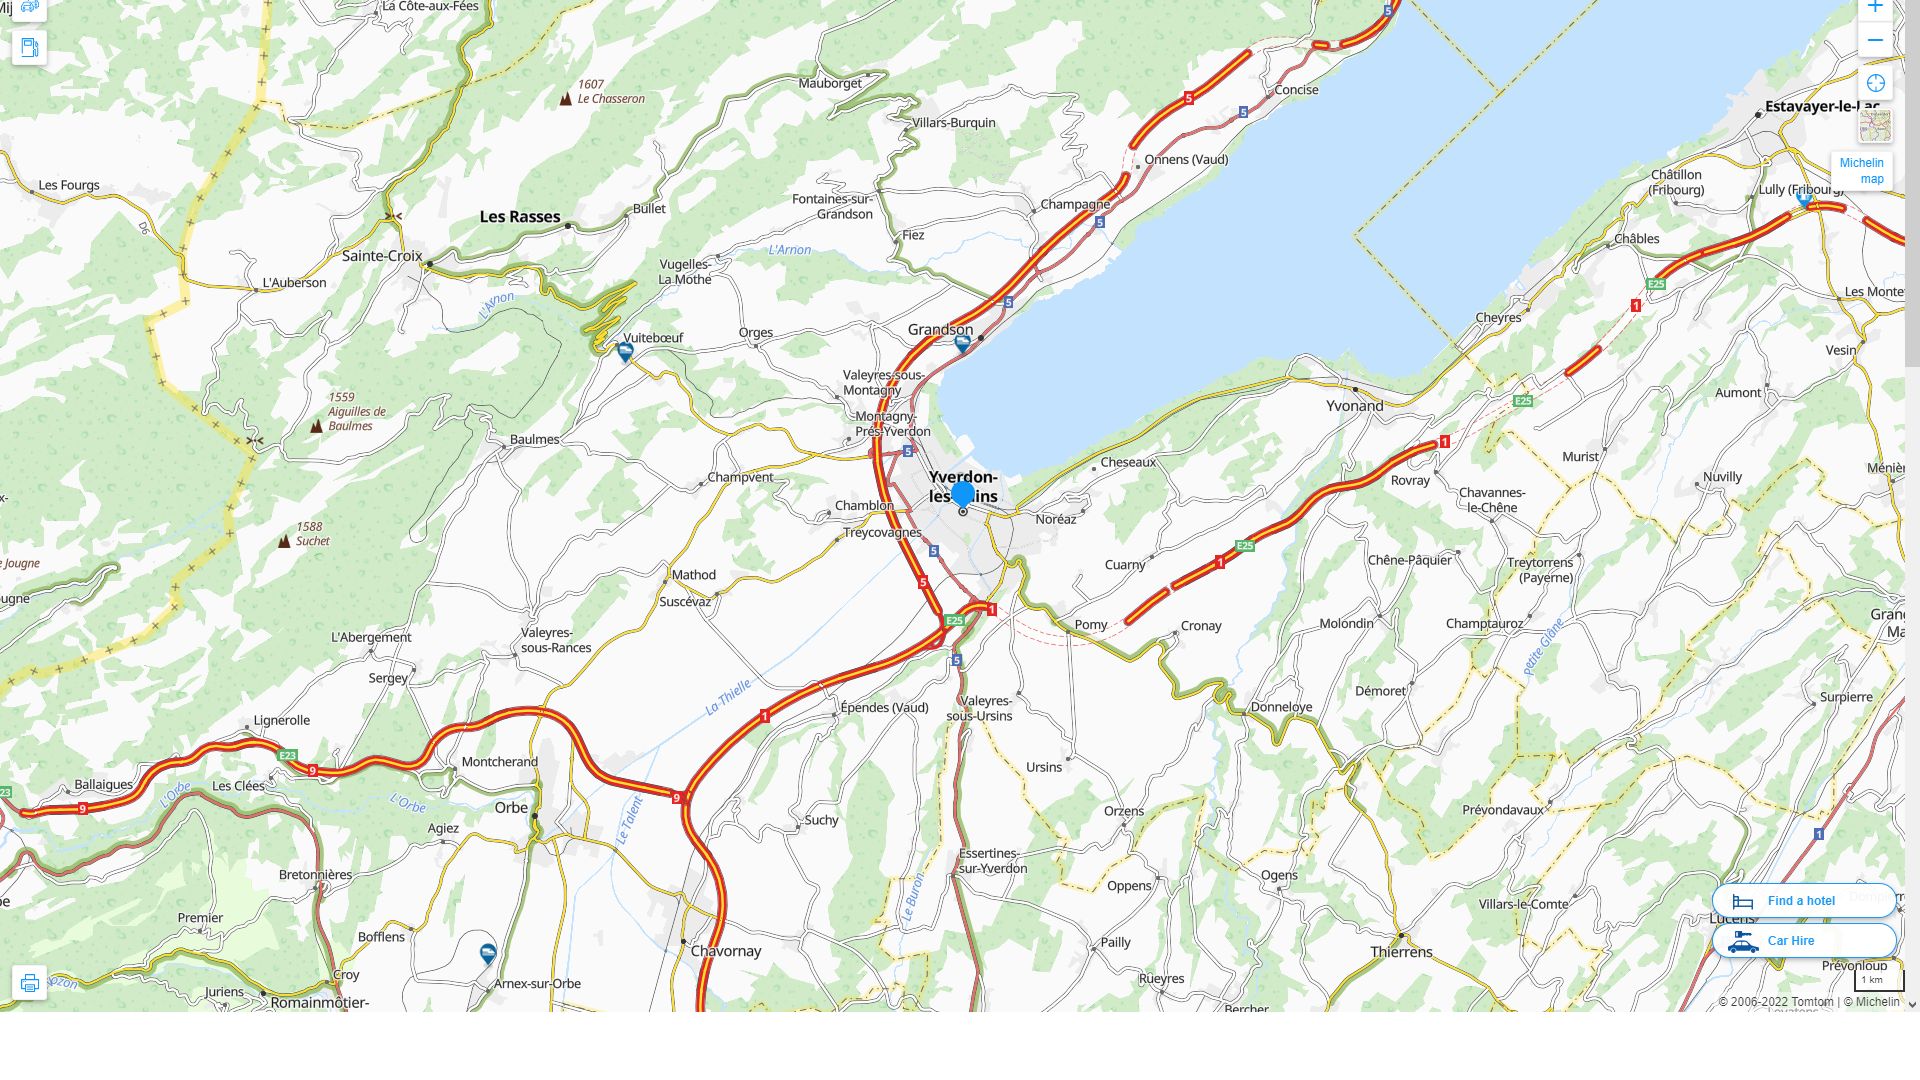 Yverdon les Bains Highway and Road Map